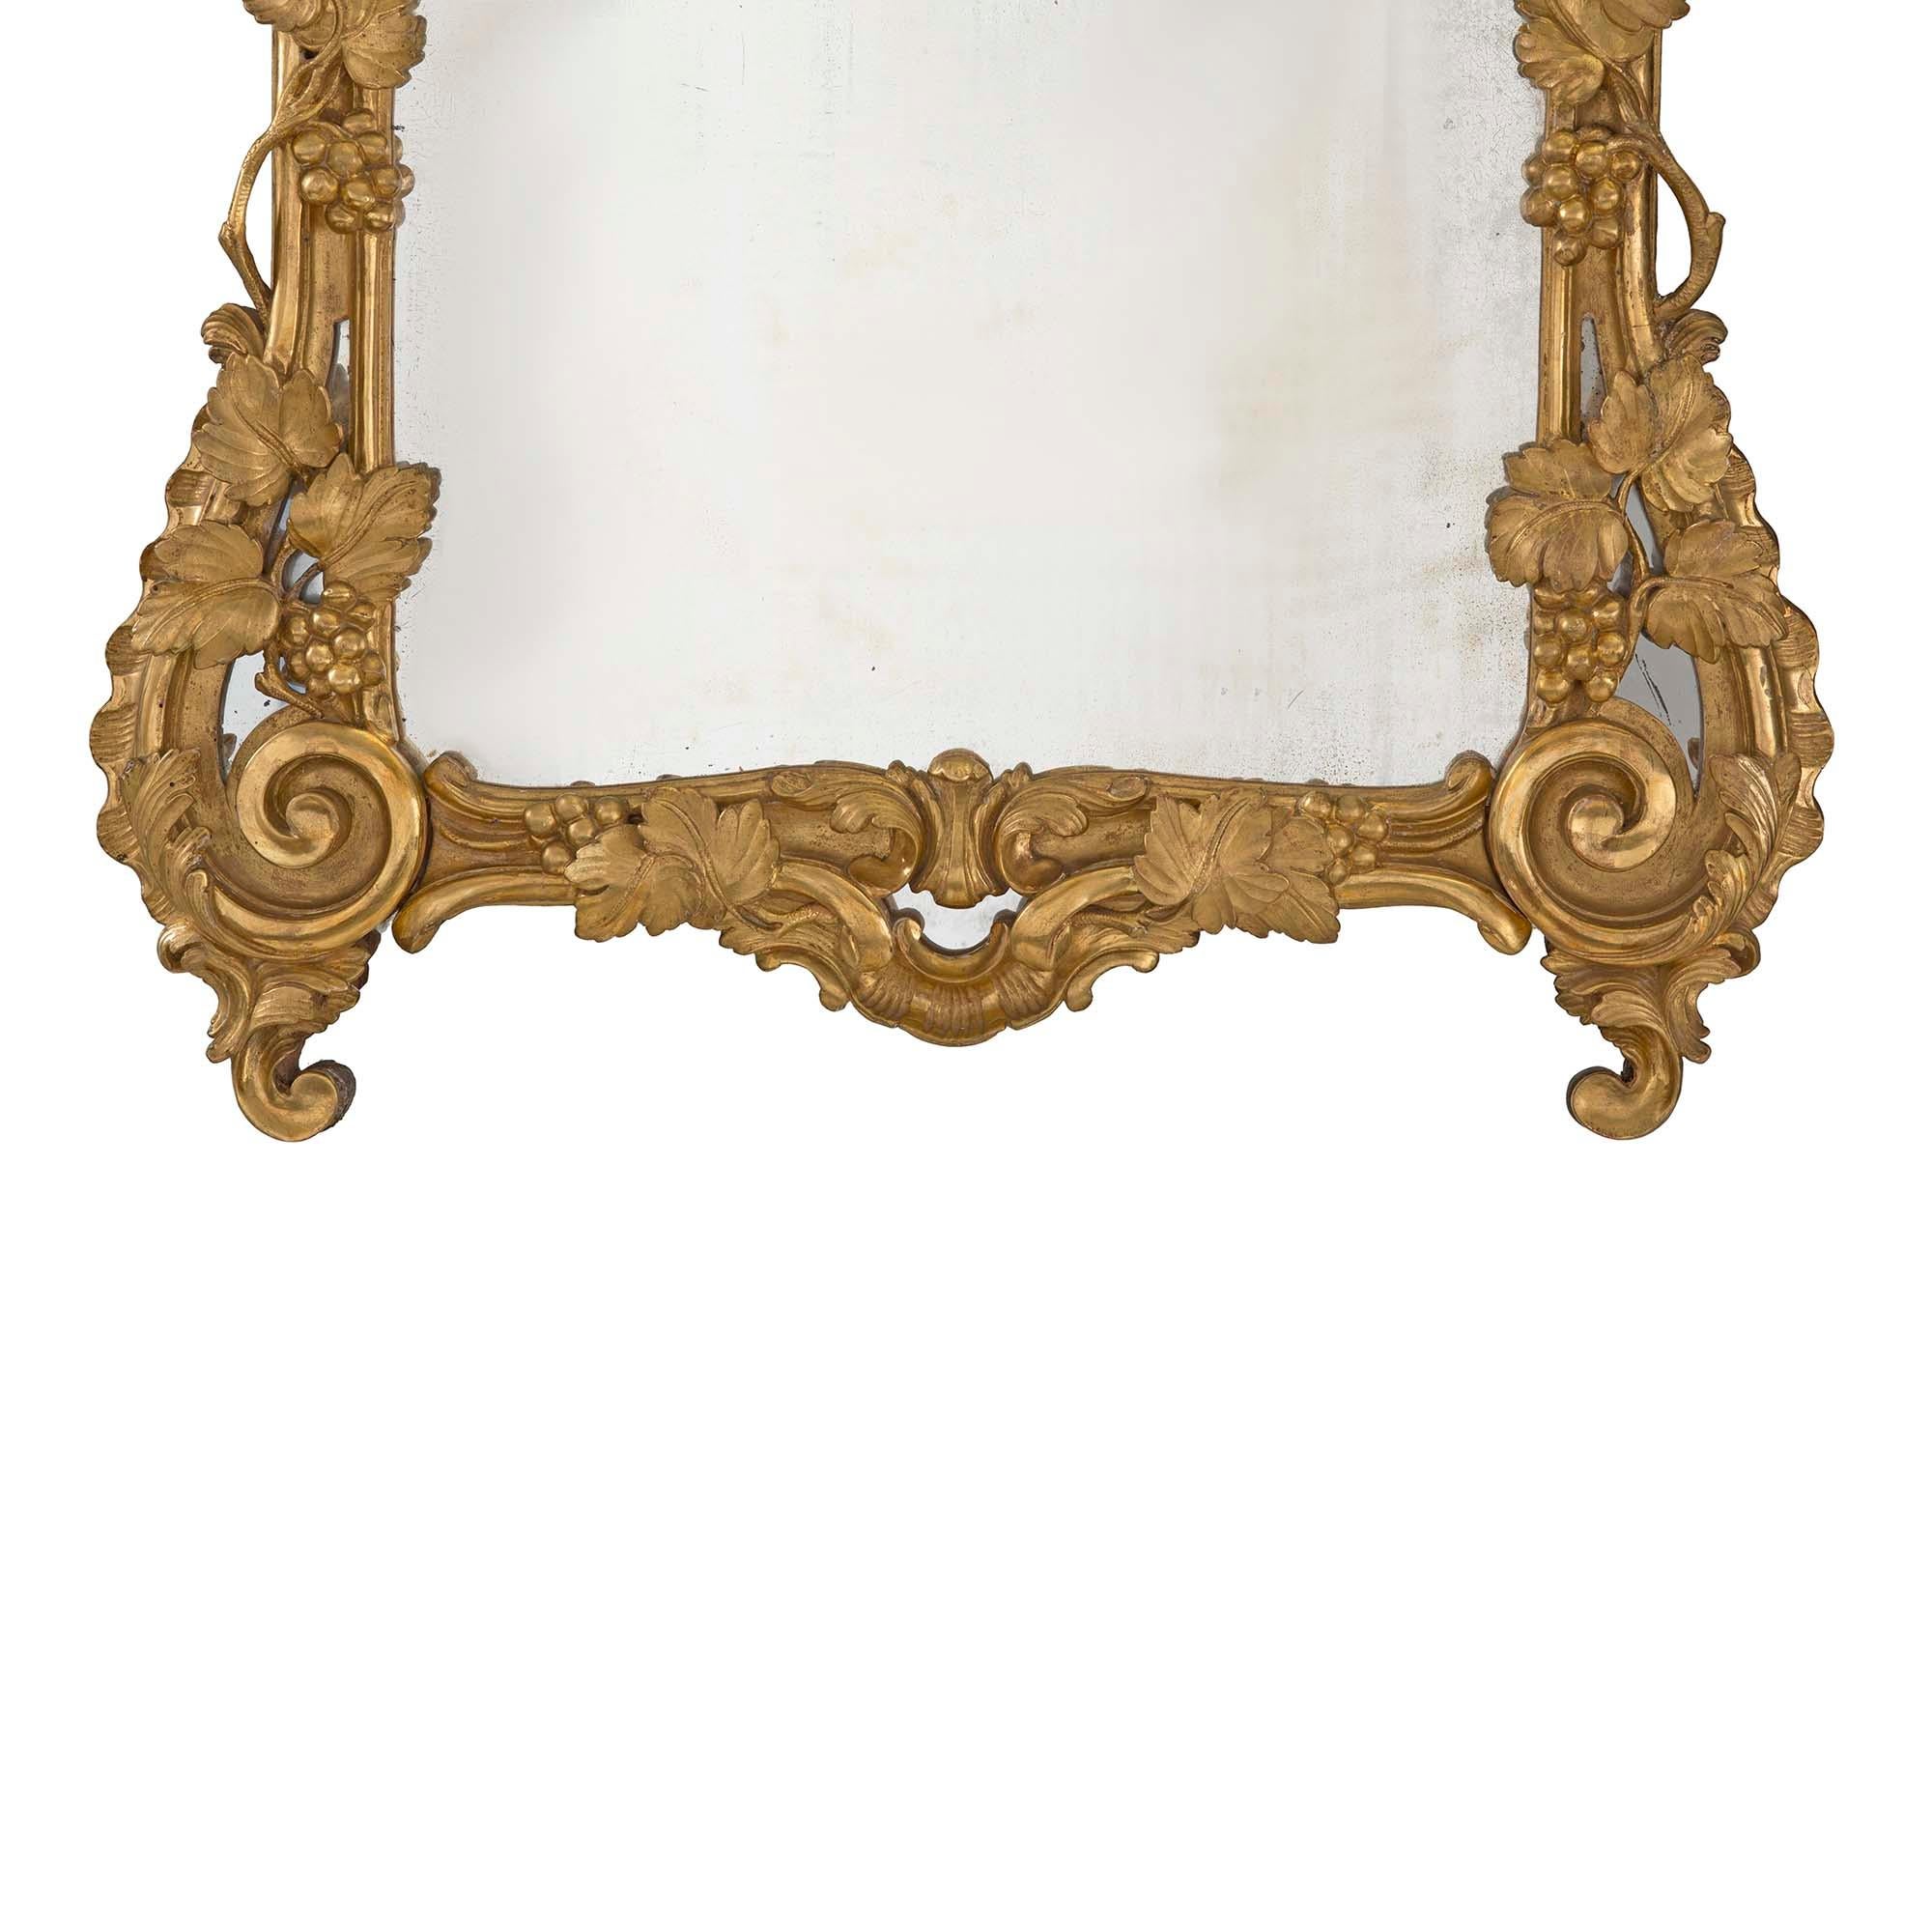 French Early 18th Century Regence Period Giltwood Mirror, circa 1720 For Sale 2